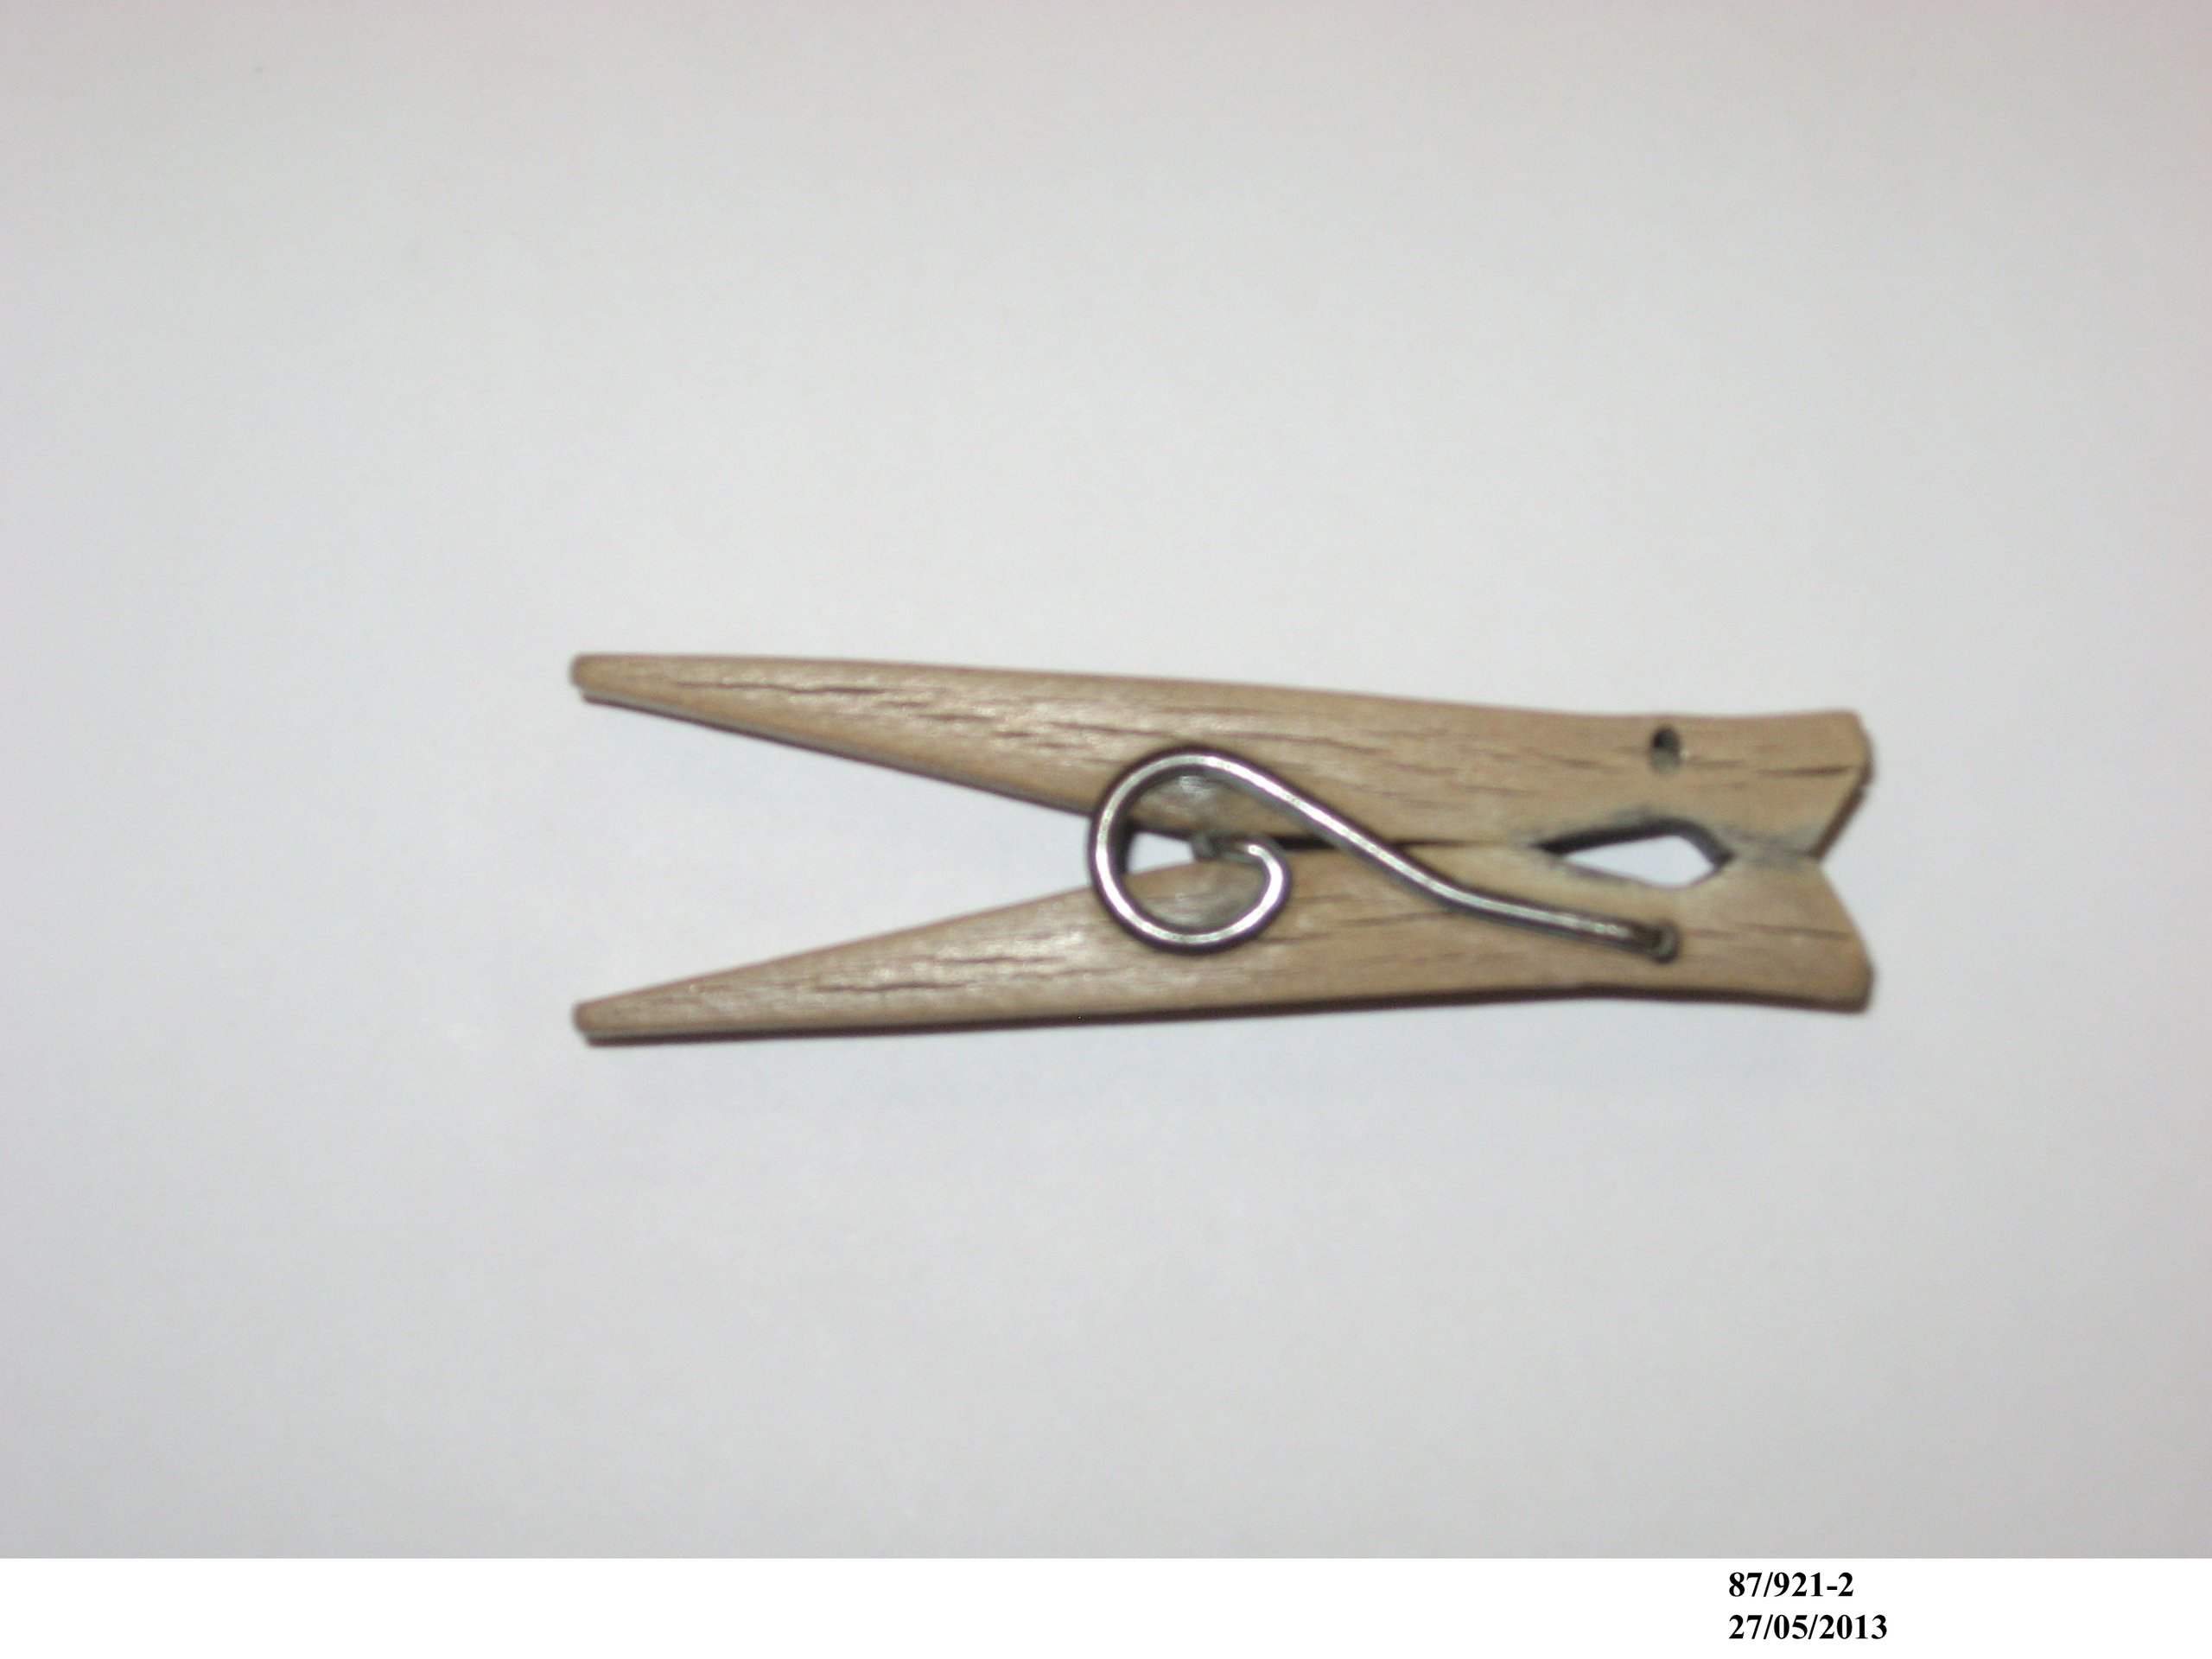 Clothes pegs made in Australia